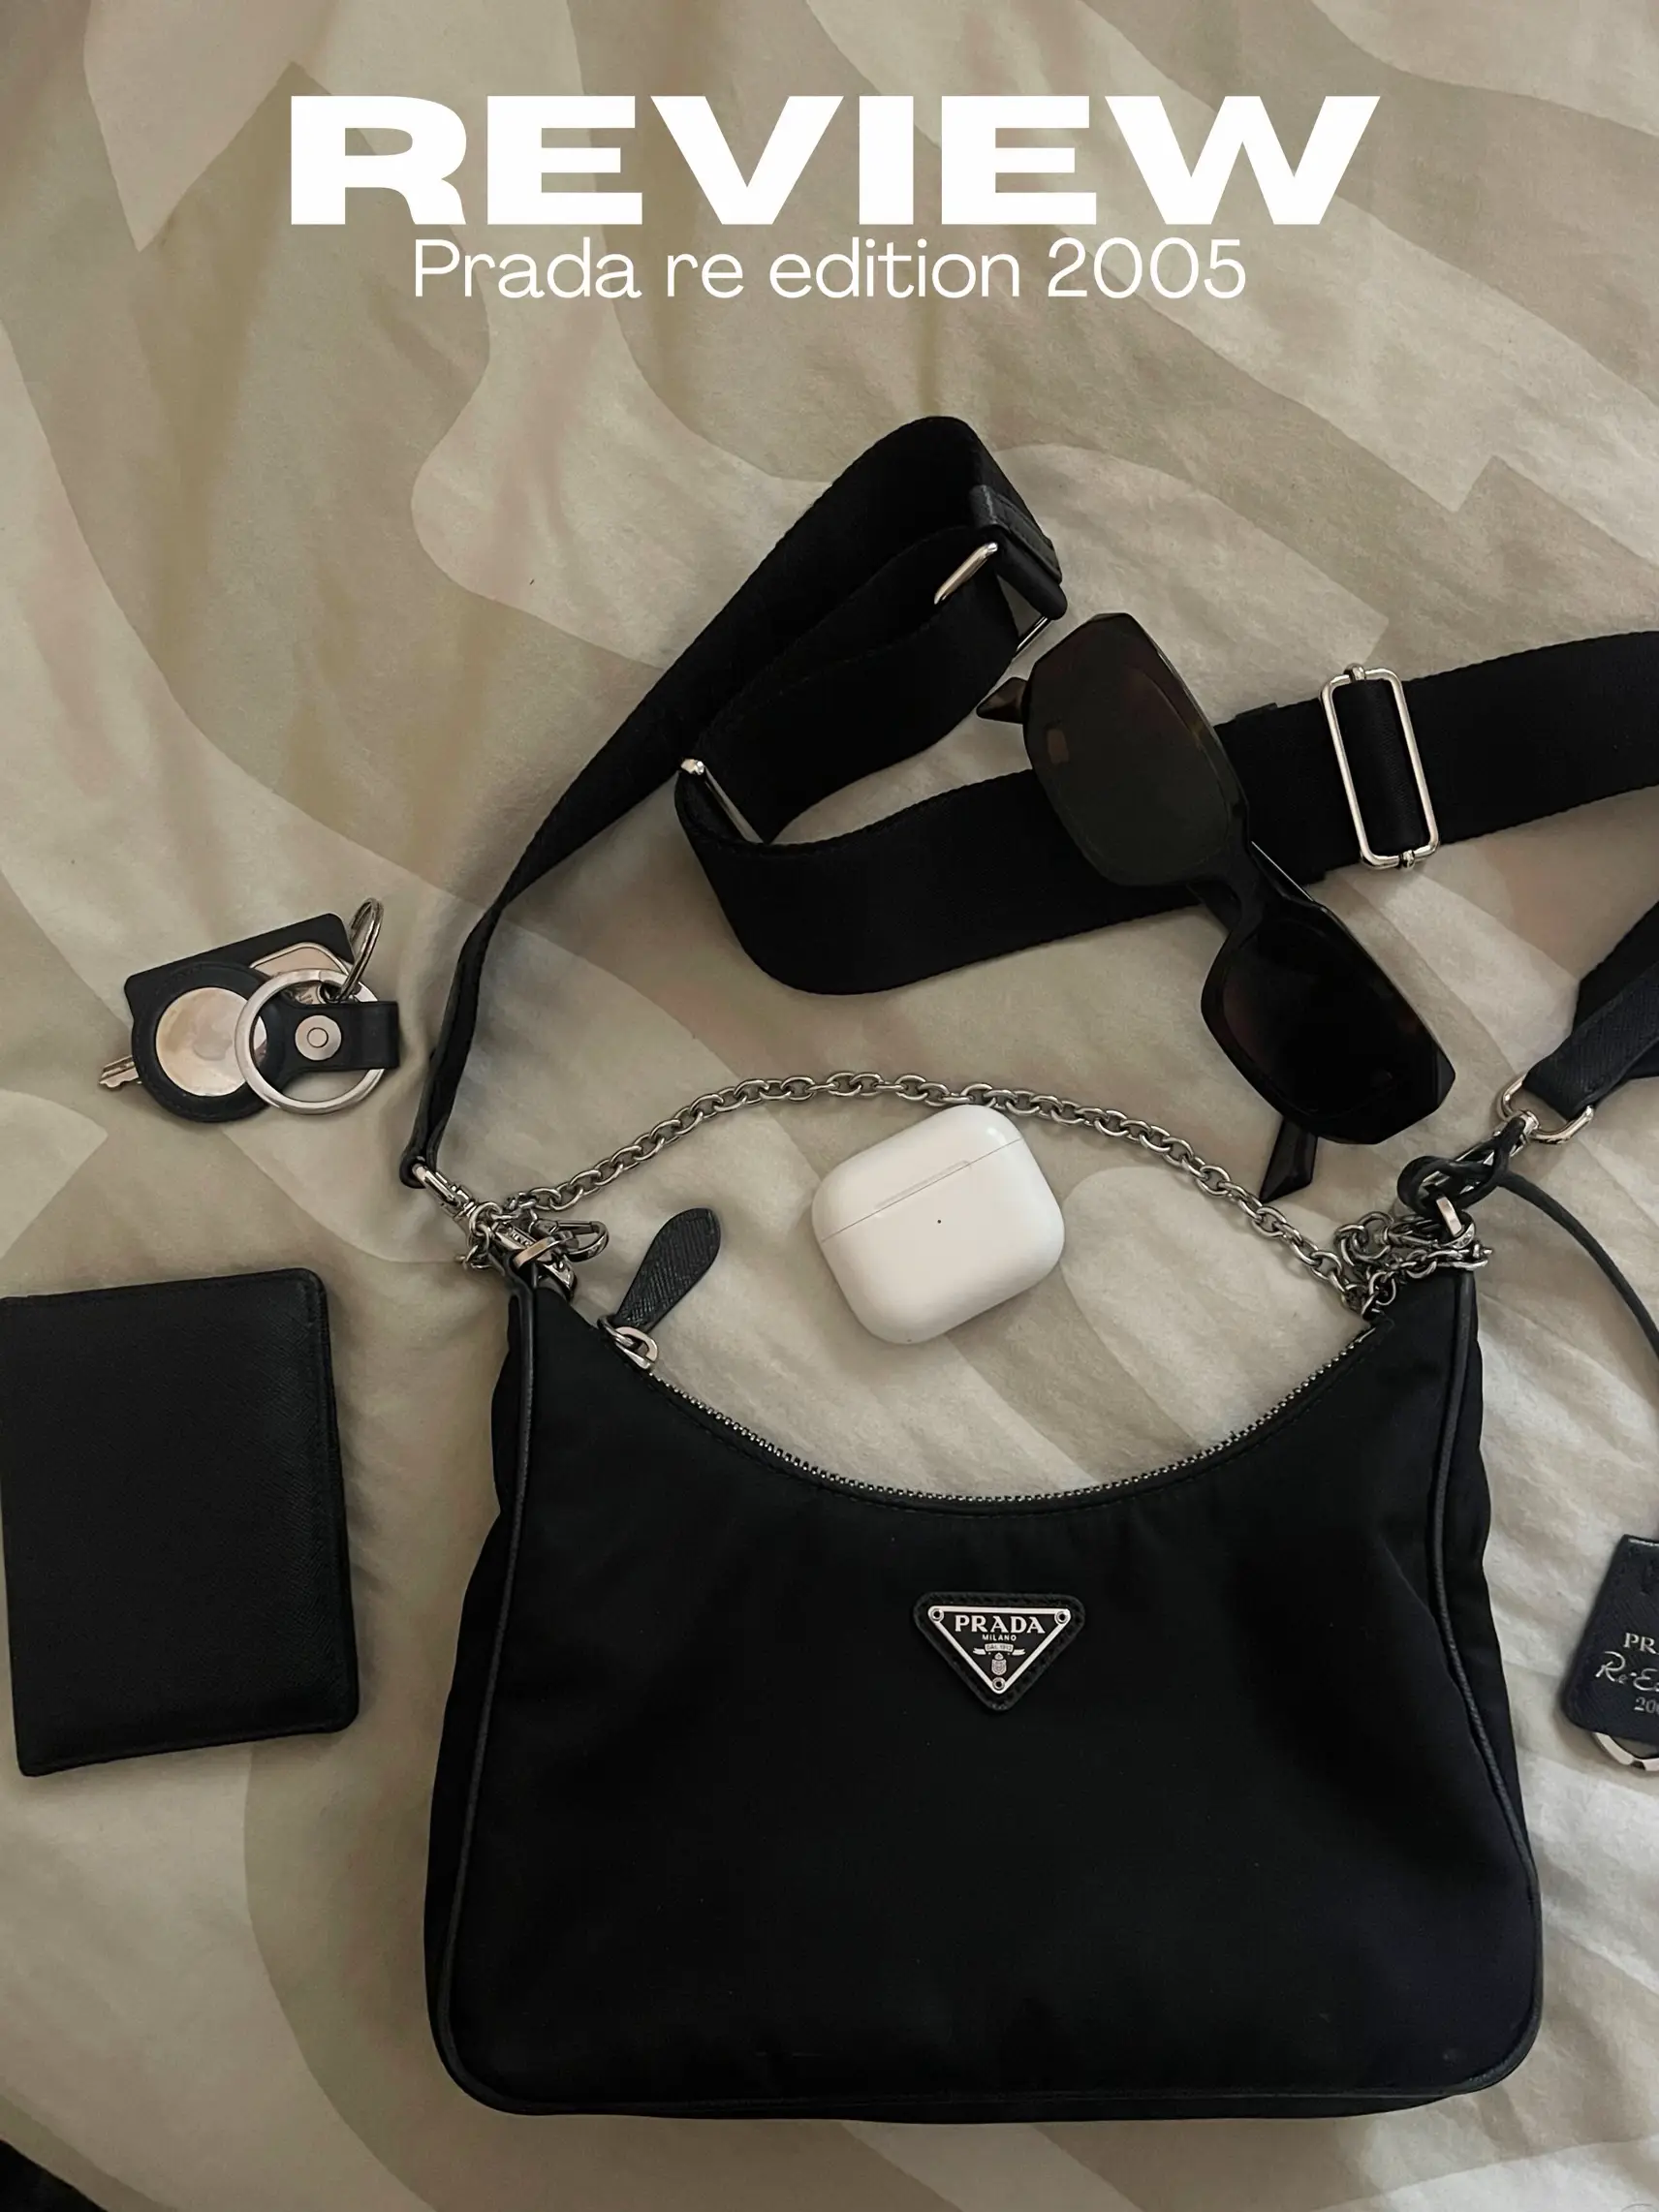 PRADA RE-EDITION 2005 SHOULDER BAG REVIEW AND WHAT'S IN MY BAG